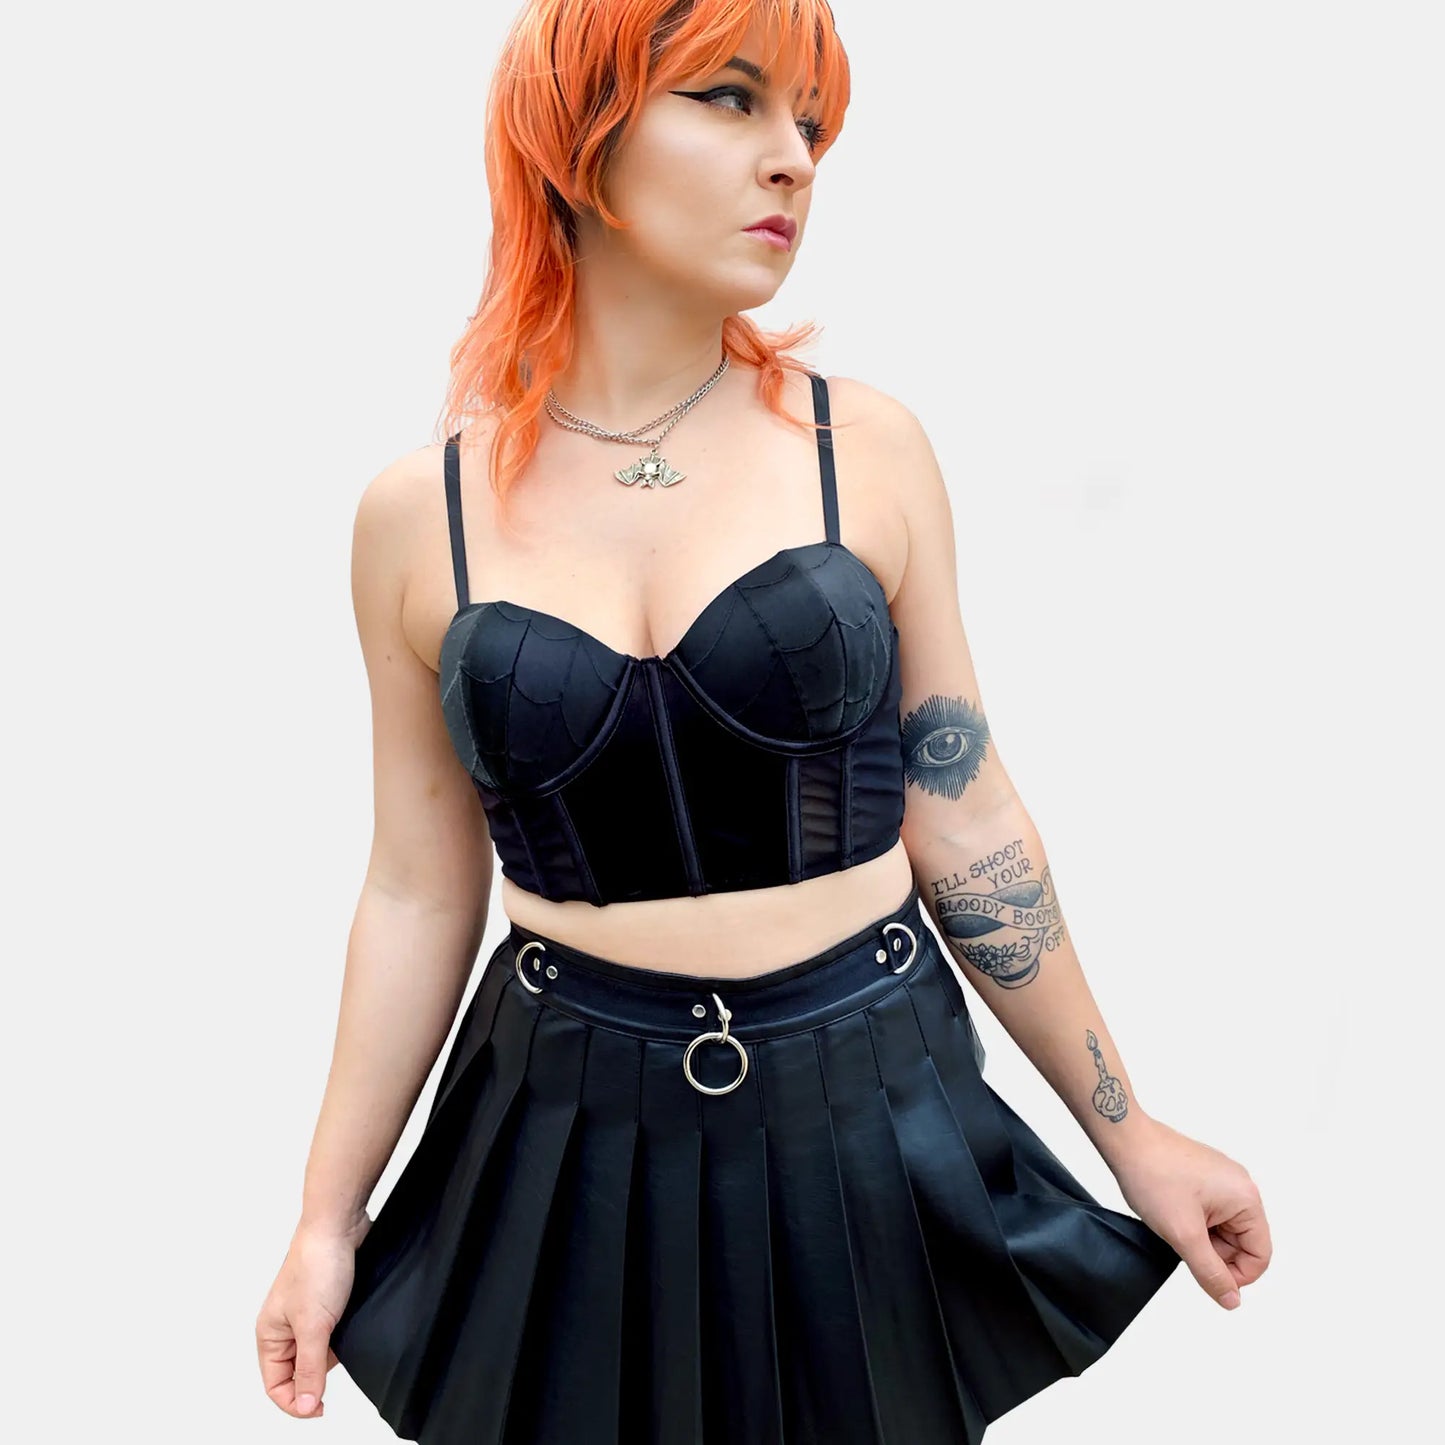 Black Widow Corset Top from Forest Ink